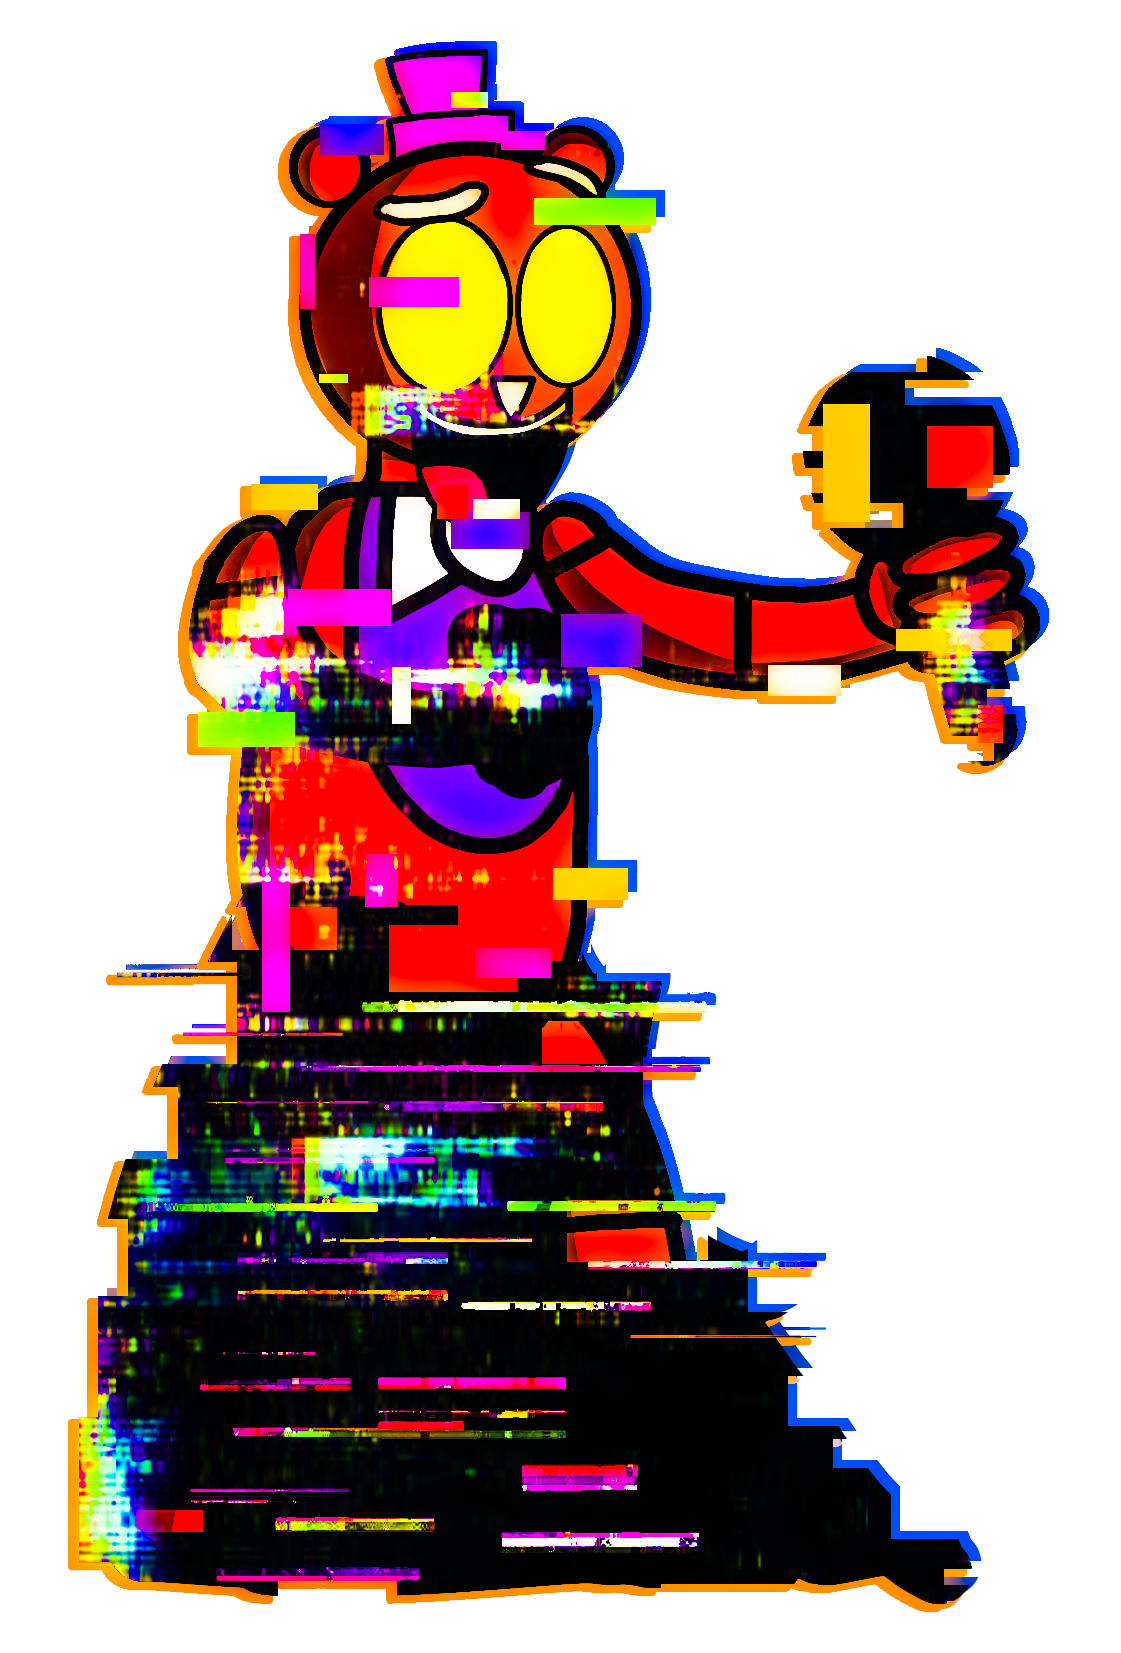 FNF Pibby Corrupted B side - Finn by ThePizzaTowerFan on DeviantArt